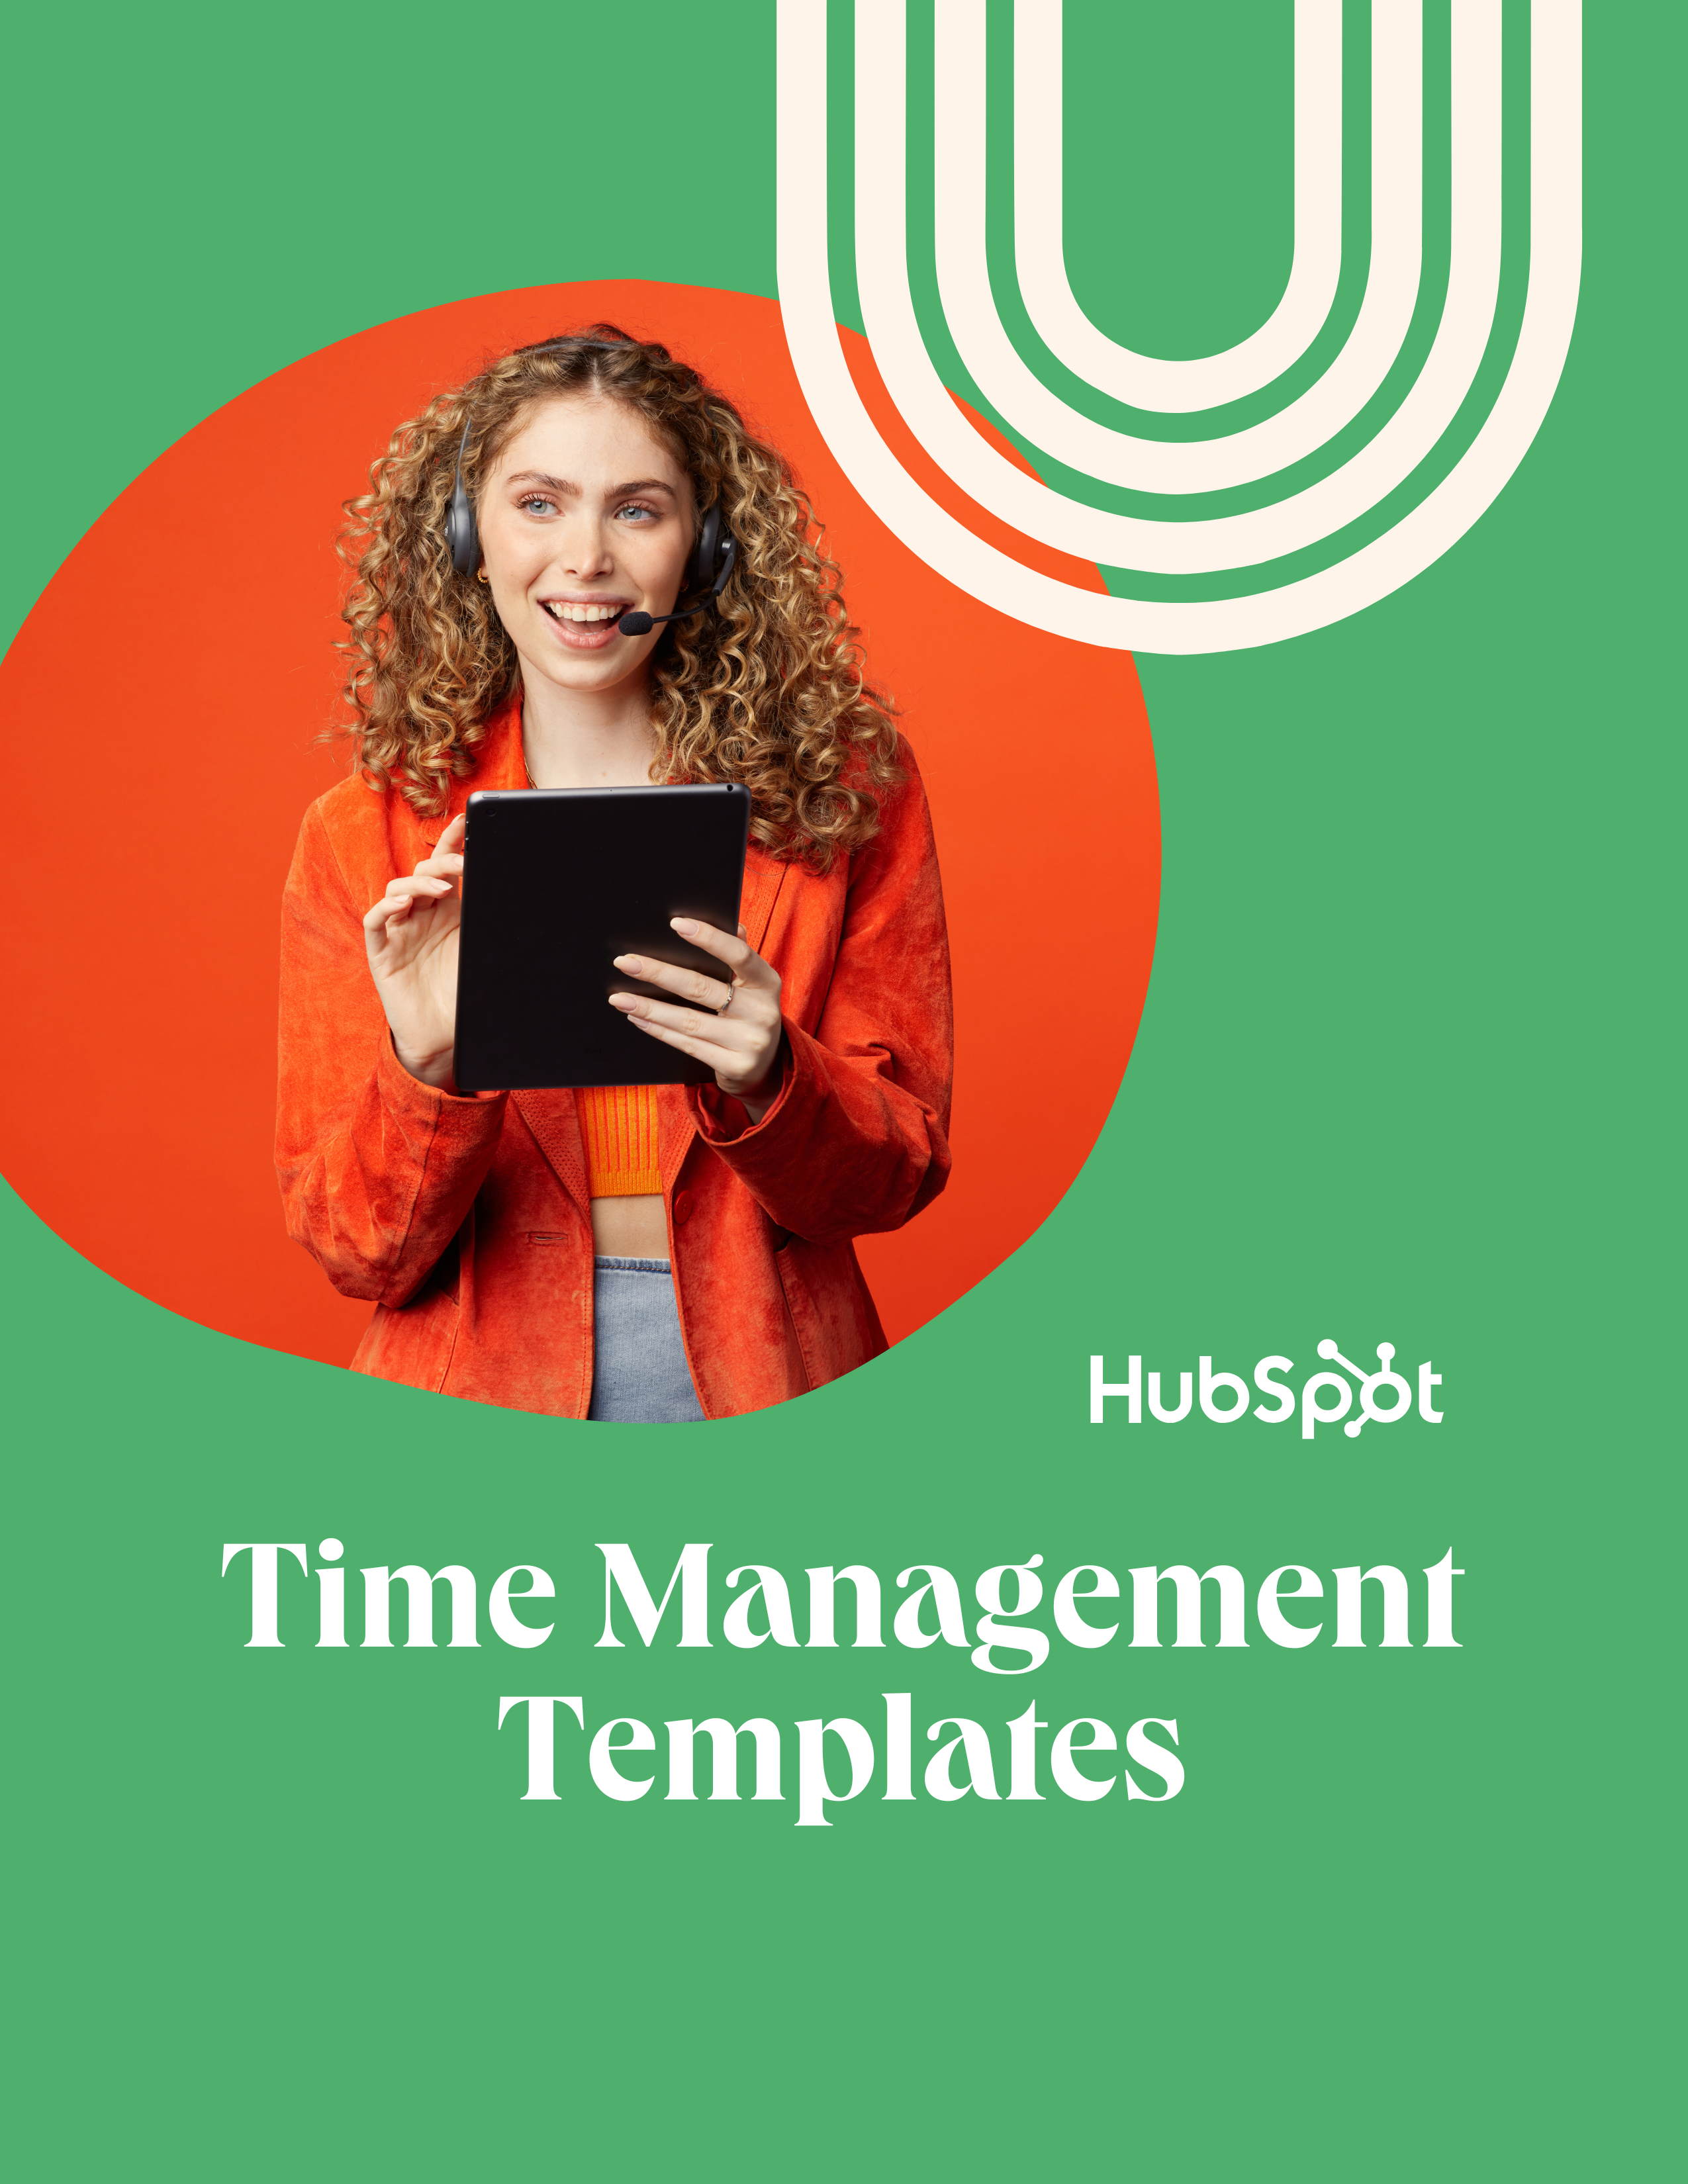 carousel 1 - time management templates (1)